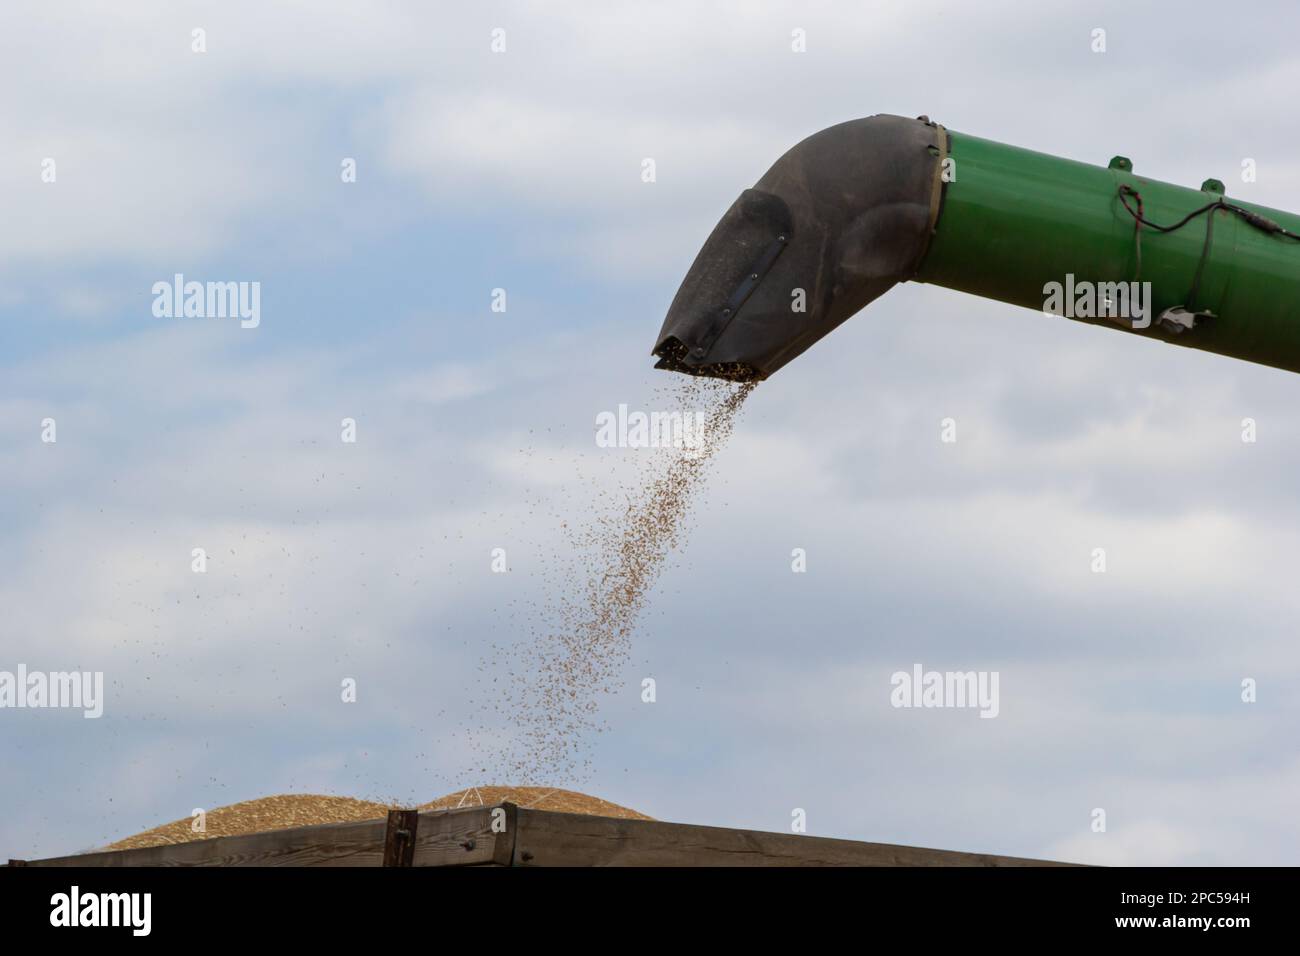 Harvester unloading wheat on the background of the sky with clouds. close up. Stock Photo